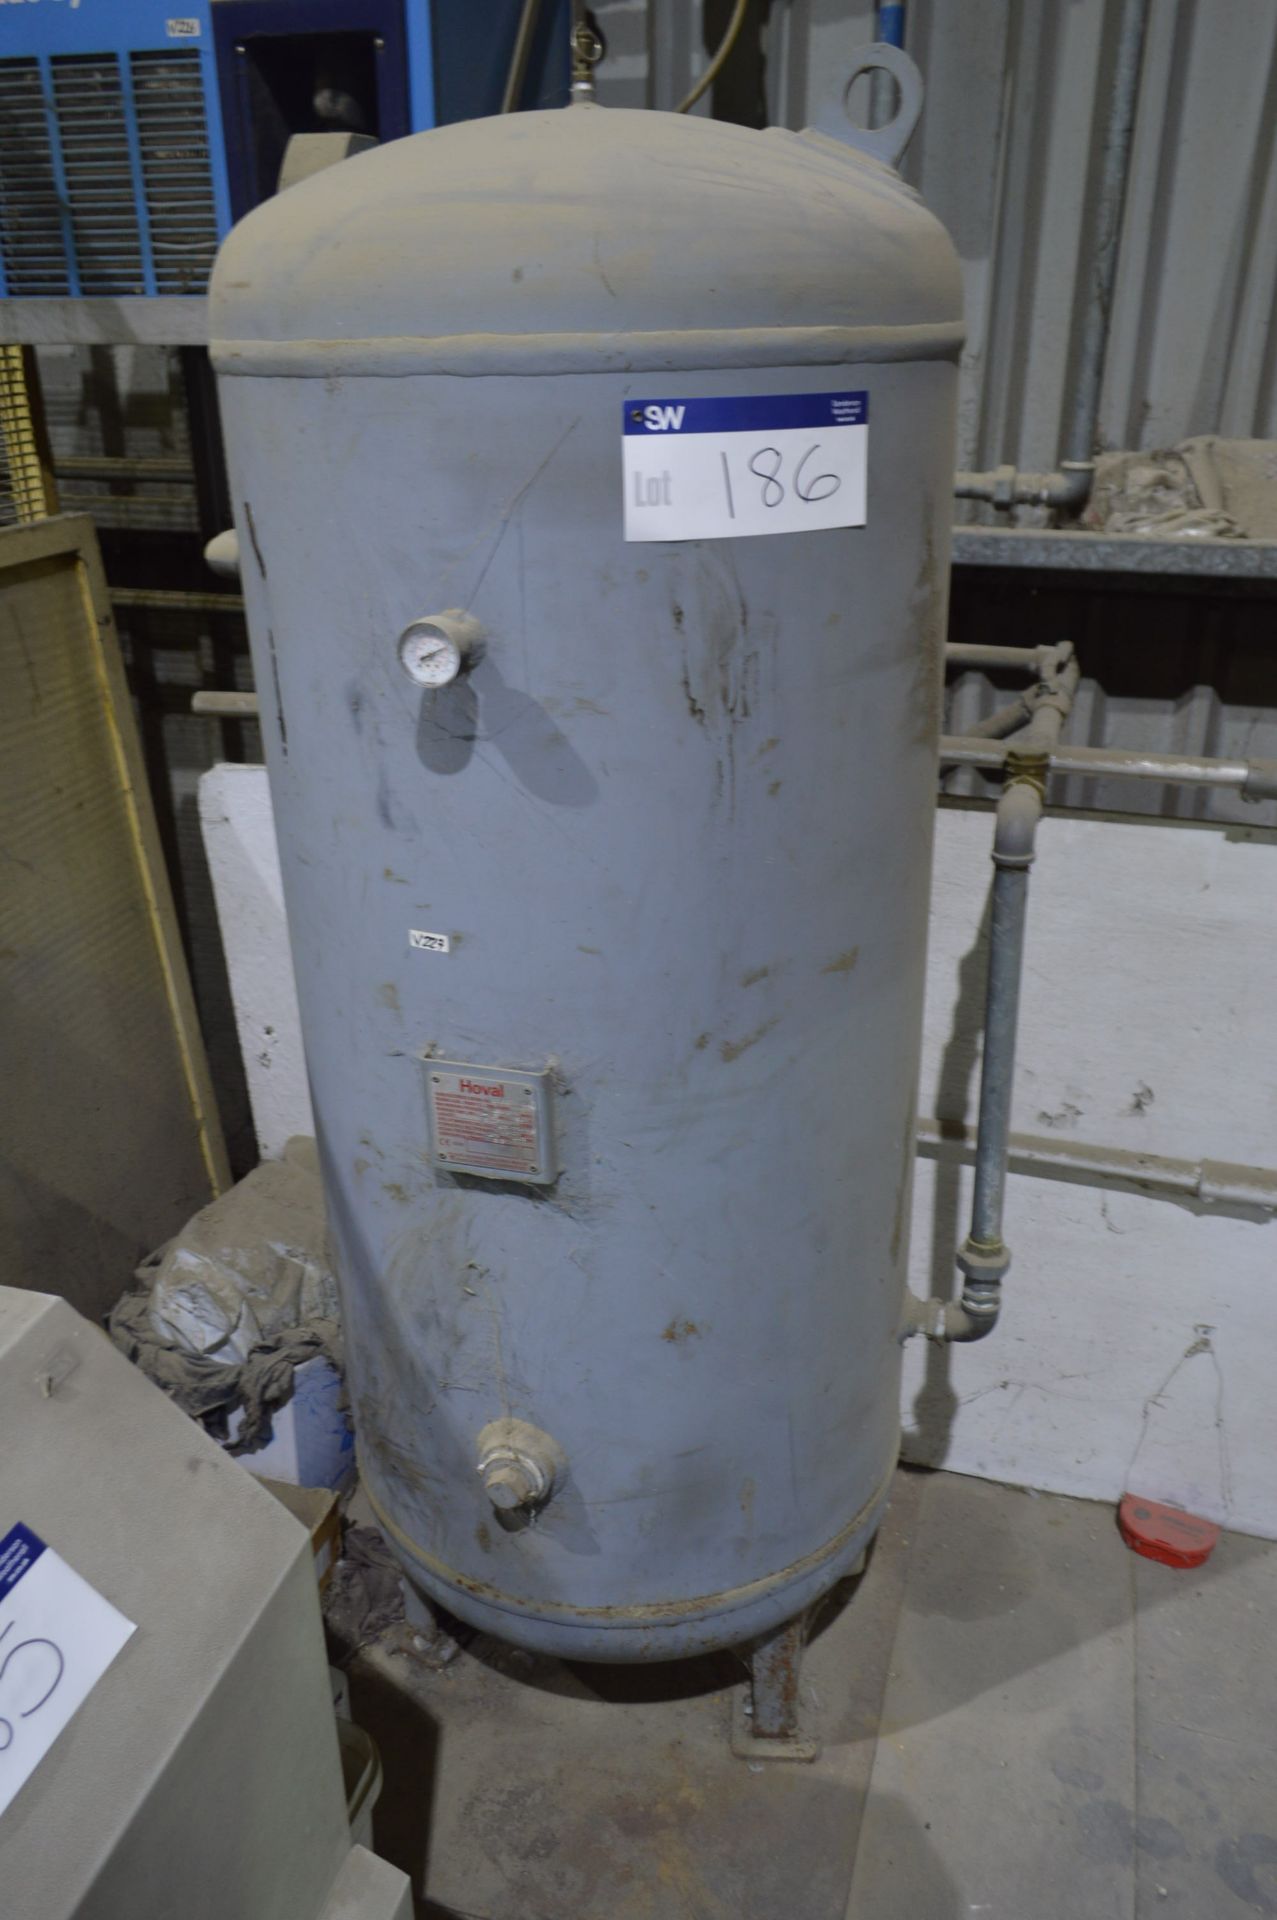 Hoval 500 litre Vertical Welded Steel Air Receiver, serial no. 63042 042, approx. 650mm dia. x 1.